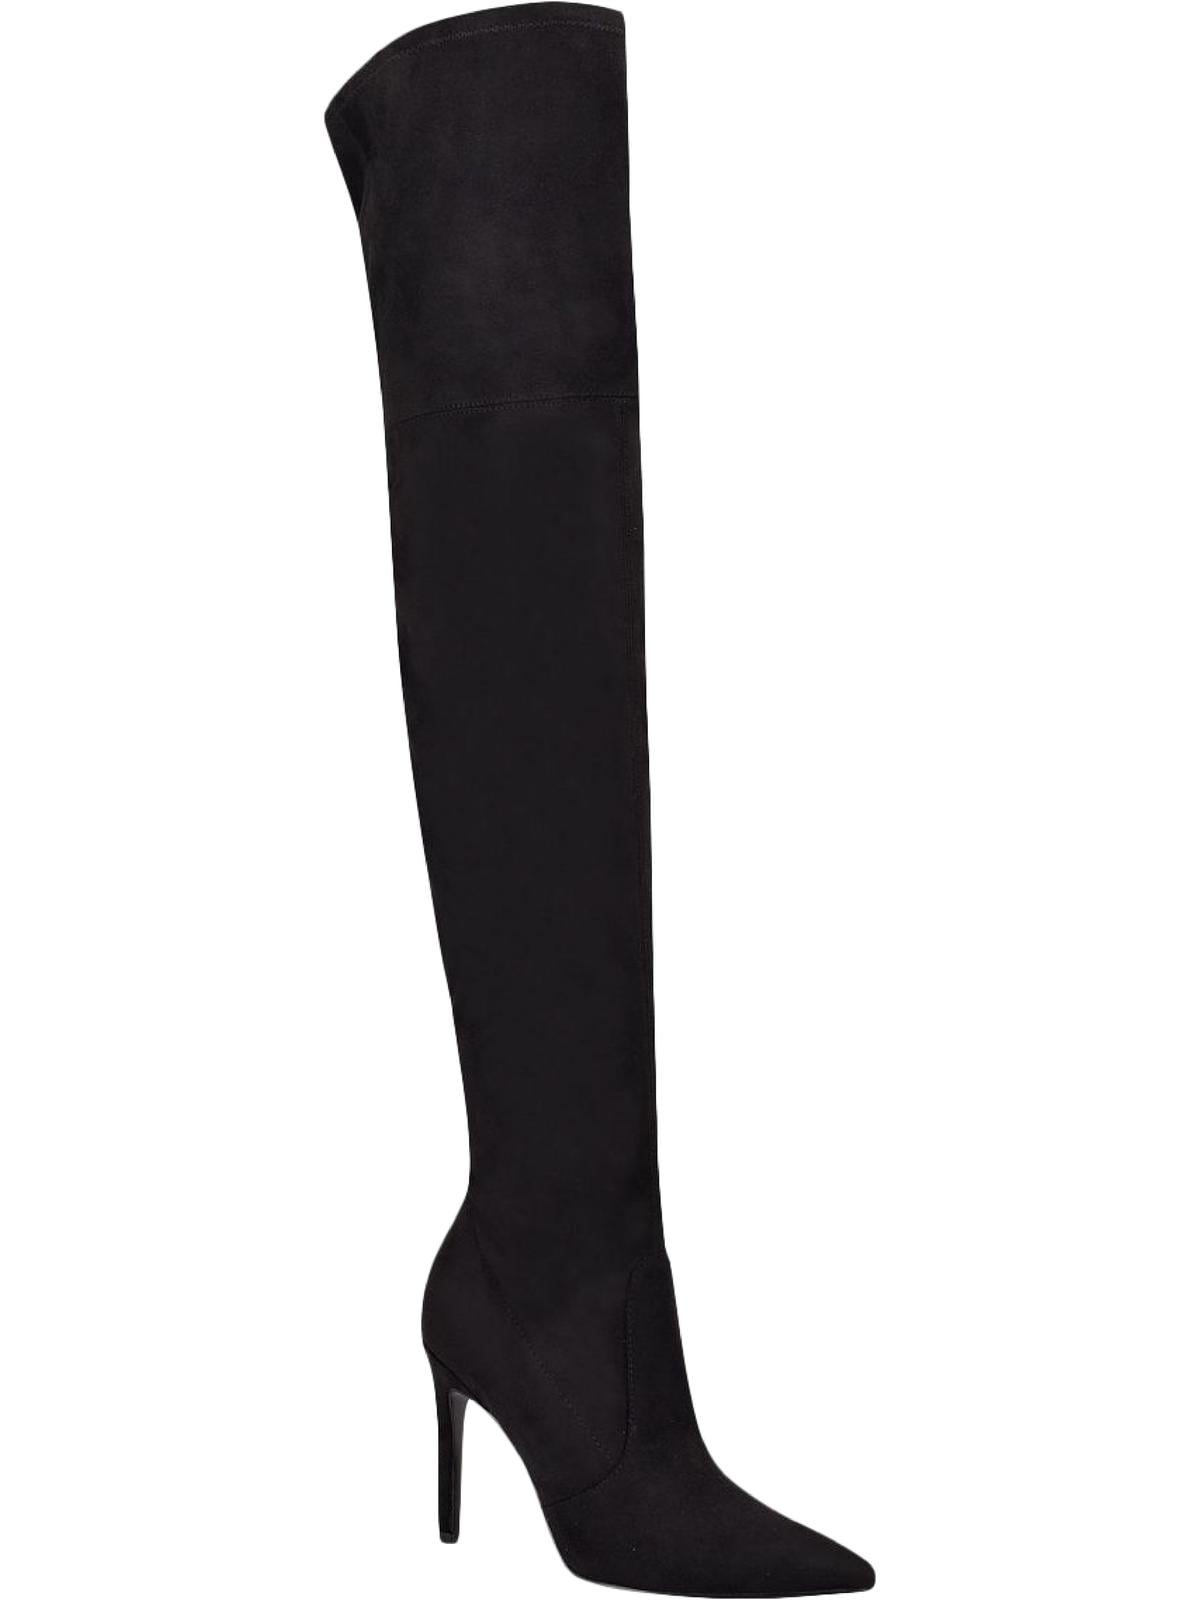 Ladies Long Tall High Thigh Suede Stiletto Heel Pointed Toe Over The Knee Boots 